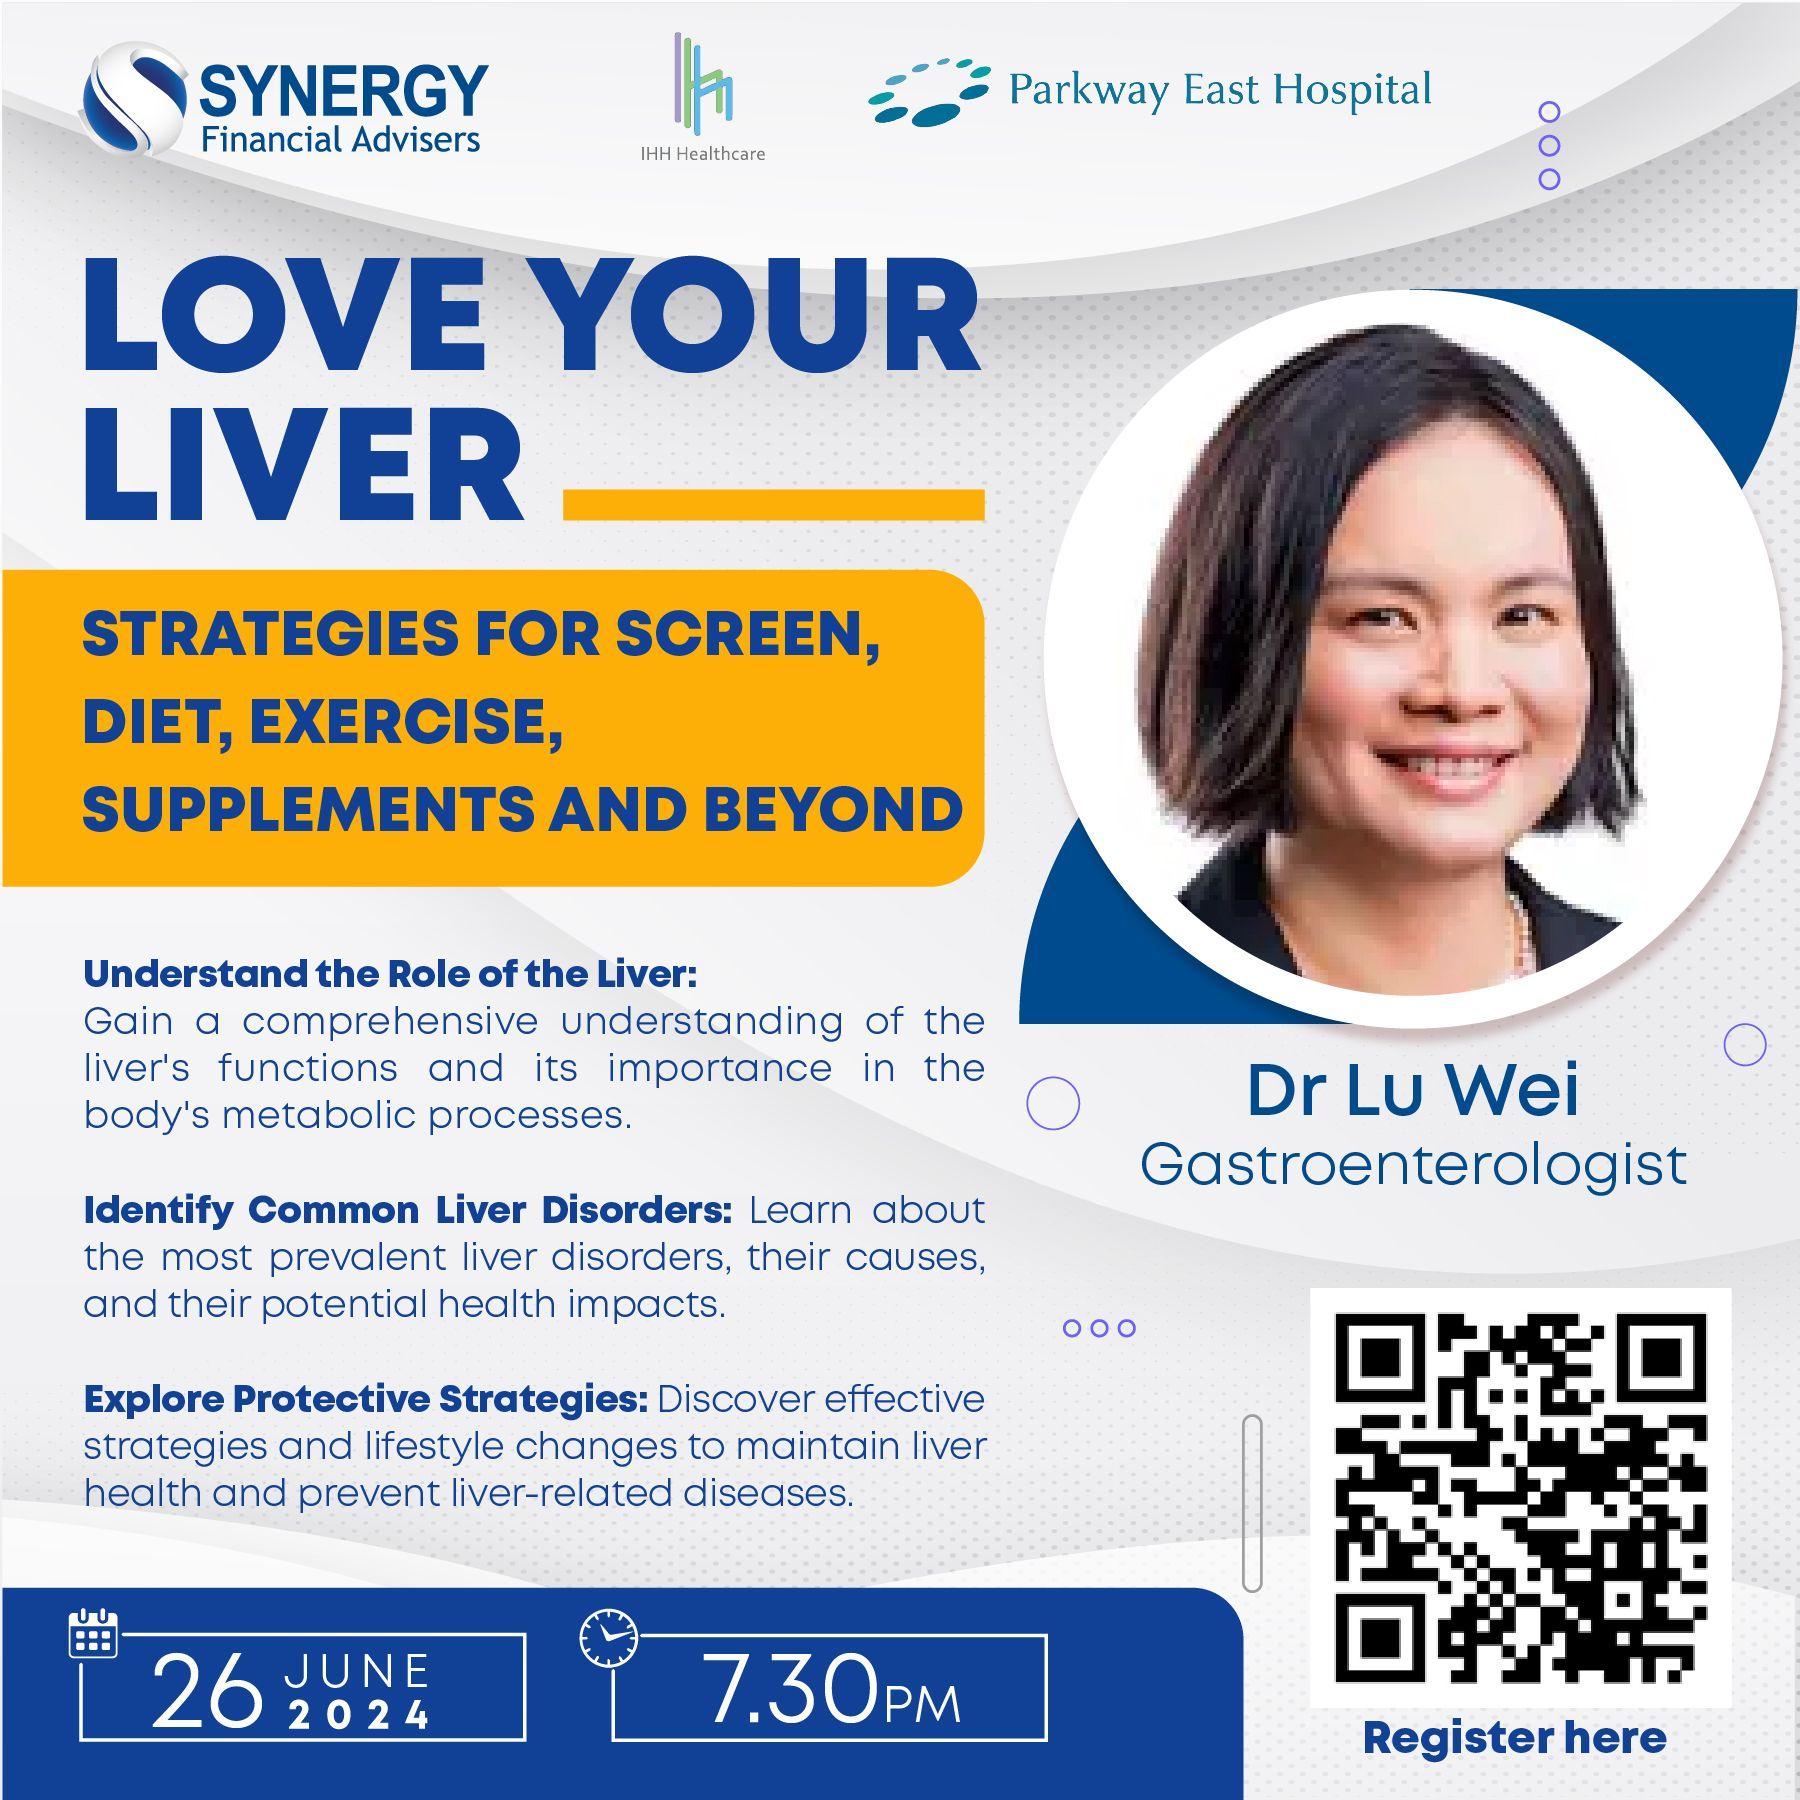 Insights from 'Love Your Liver' Webinar with Dr. Lu Wei